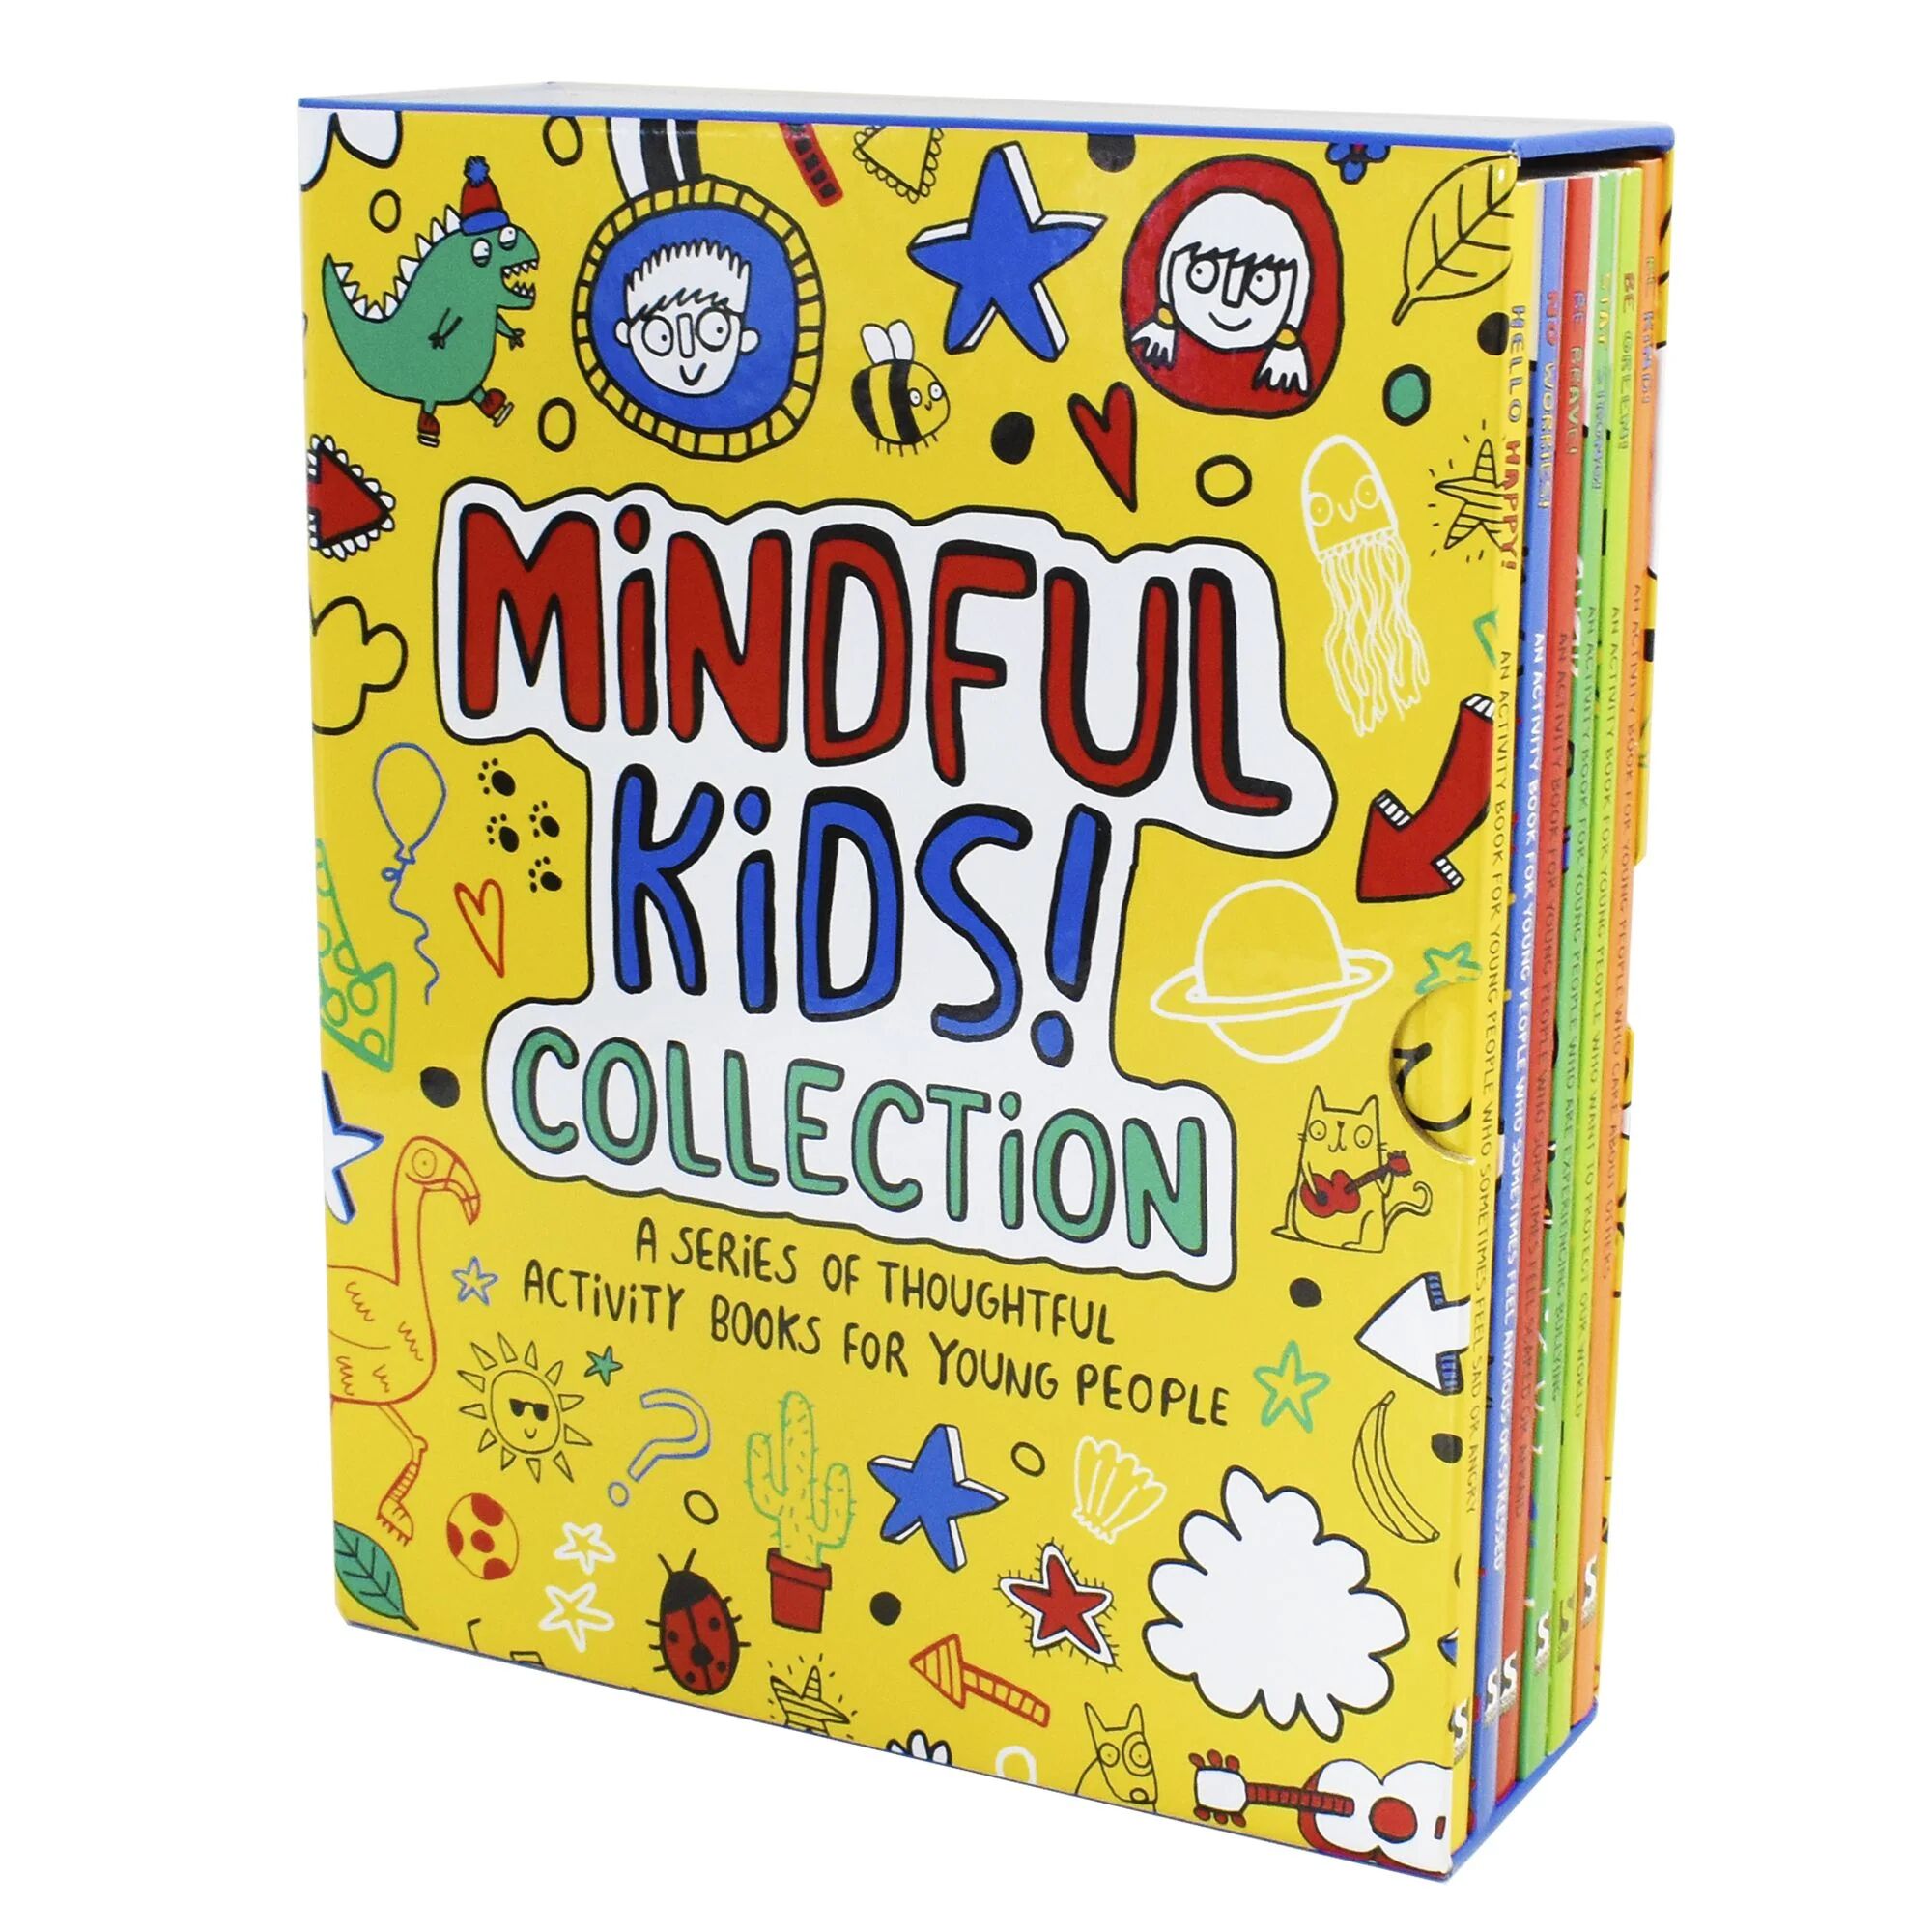 Mindful Kids 6 Books Collection Activity Box Set by Sharie Coombes - Paperback - Age 5-7 Studio Press